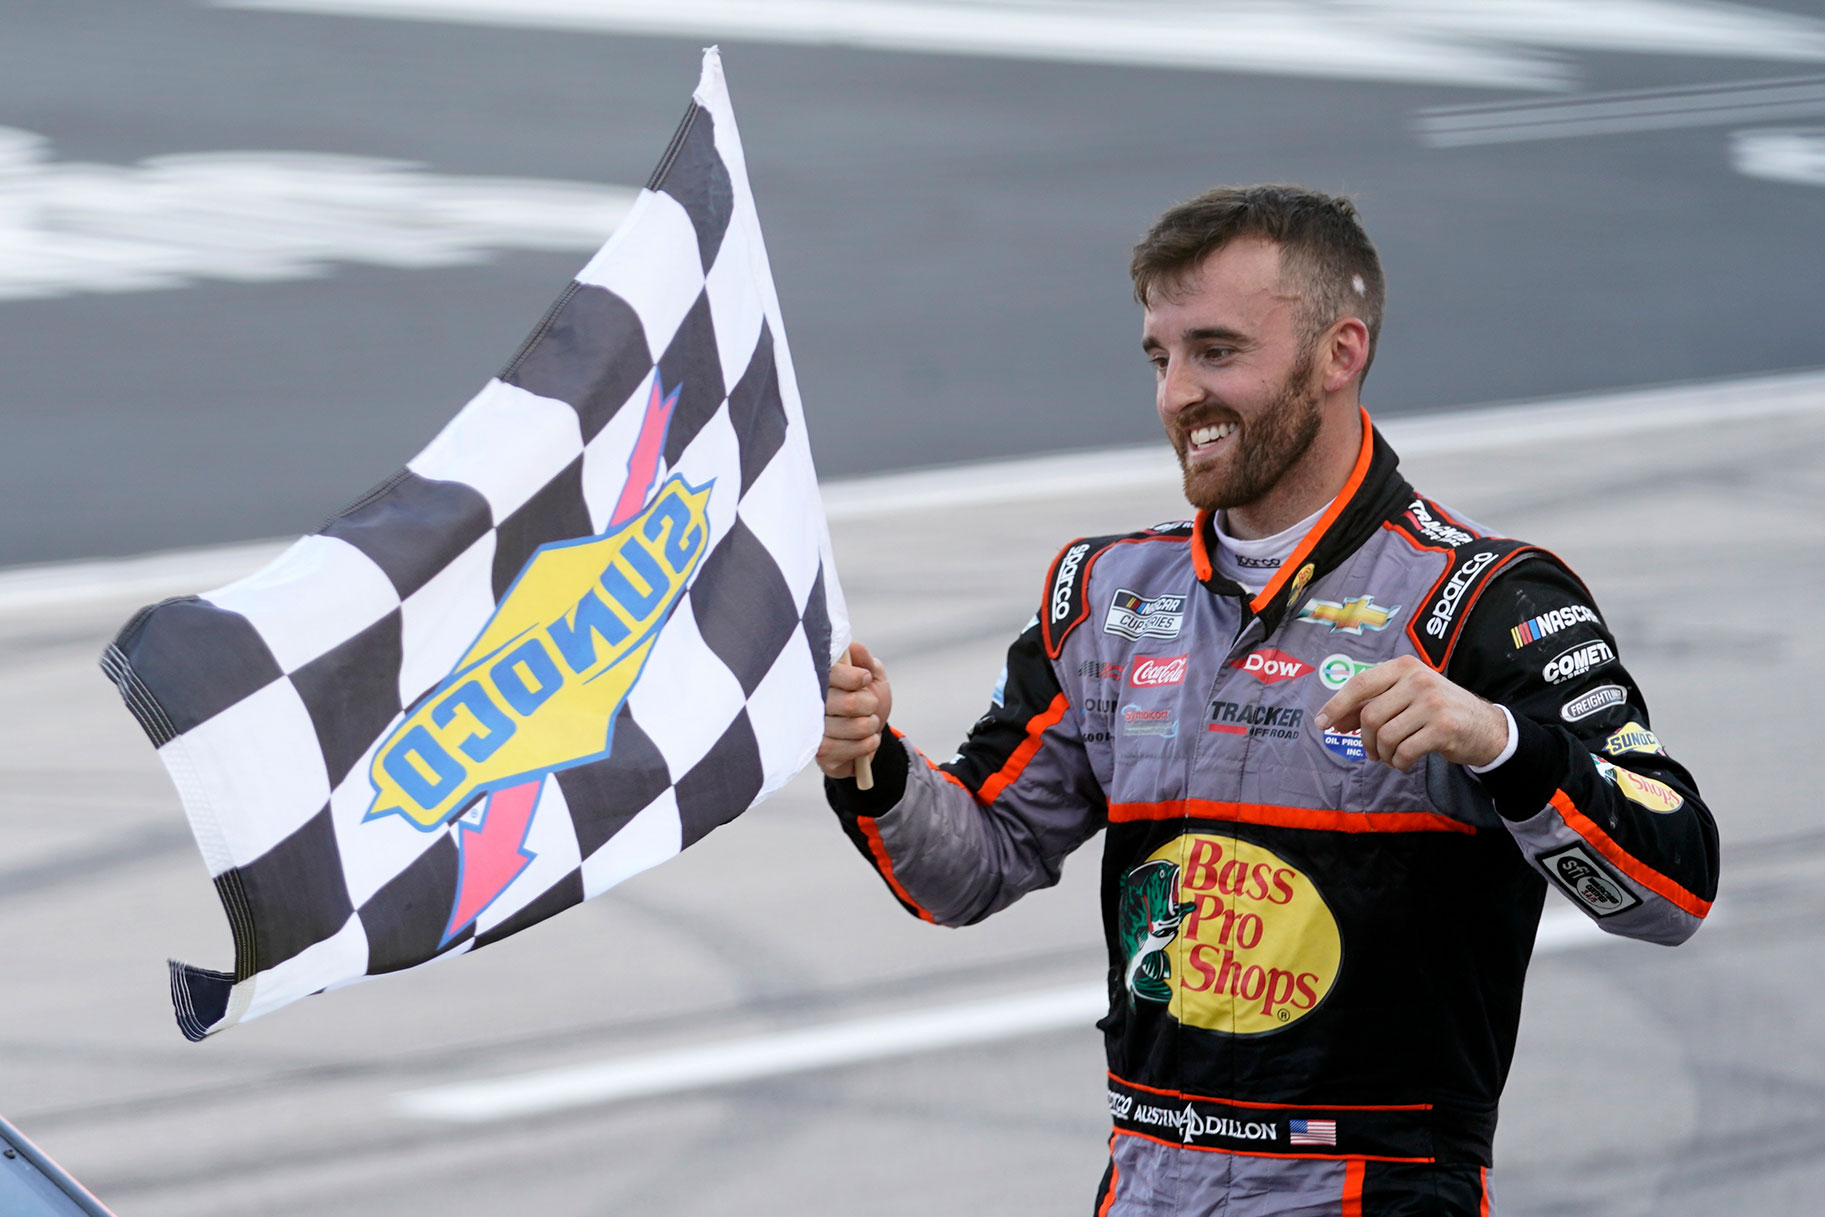 Austin Dillon celebrates with the checkered flag after winning the NASCAR Cup Series